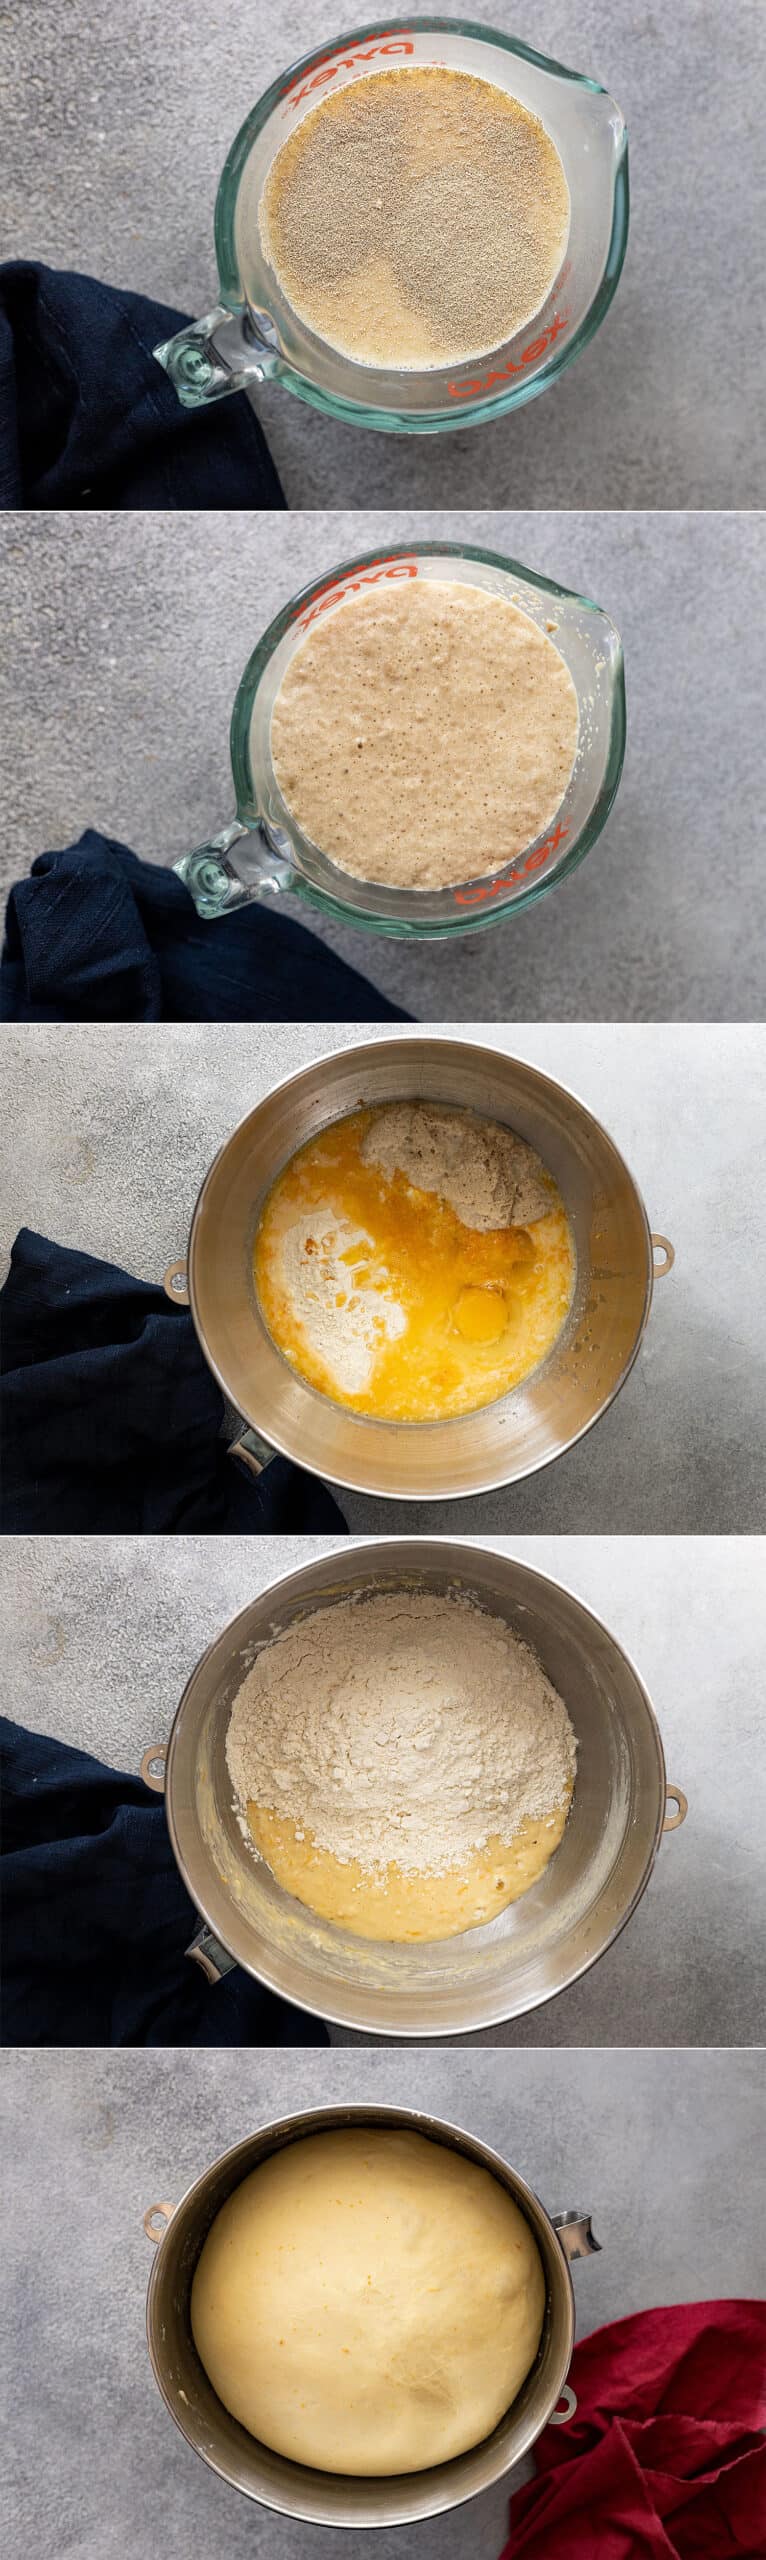 Five pictures showing how to mix the dough. 